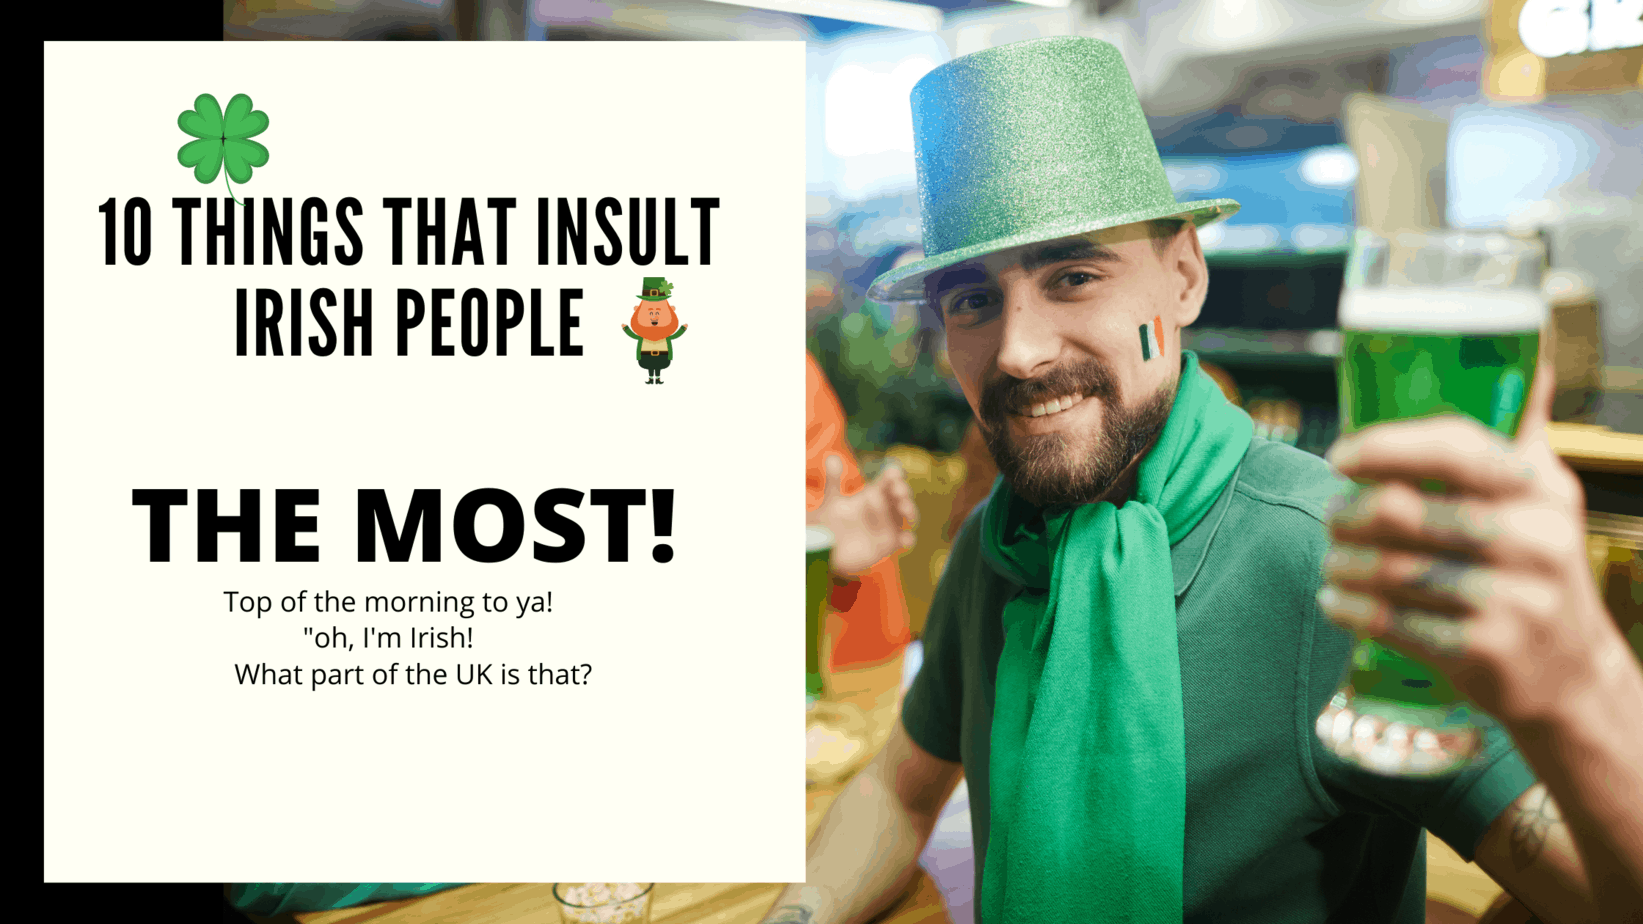 10 Things that insult Irish people the most